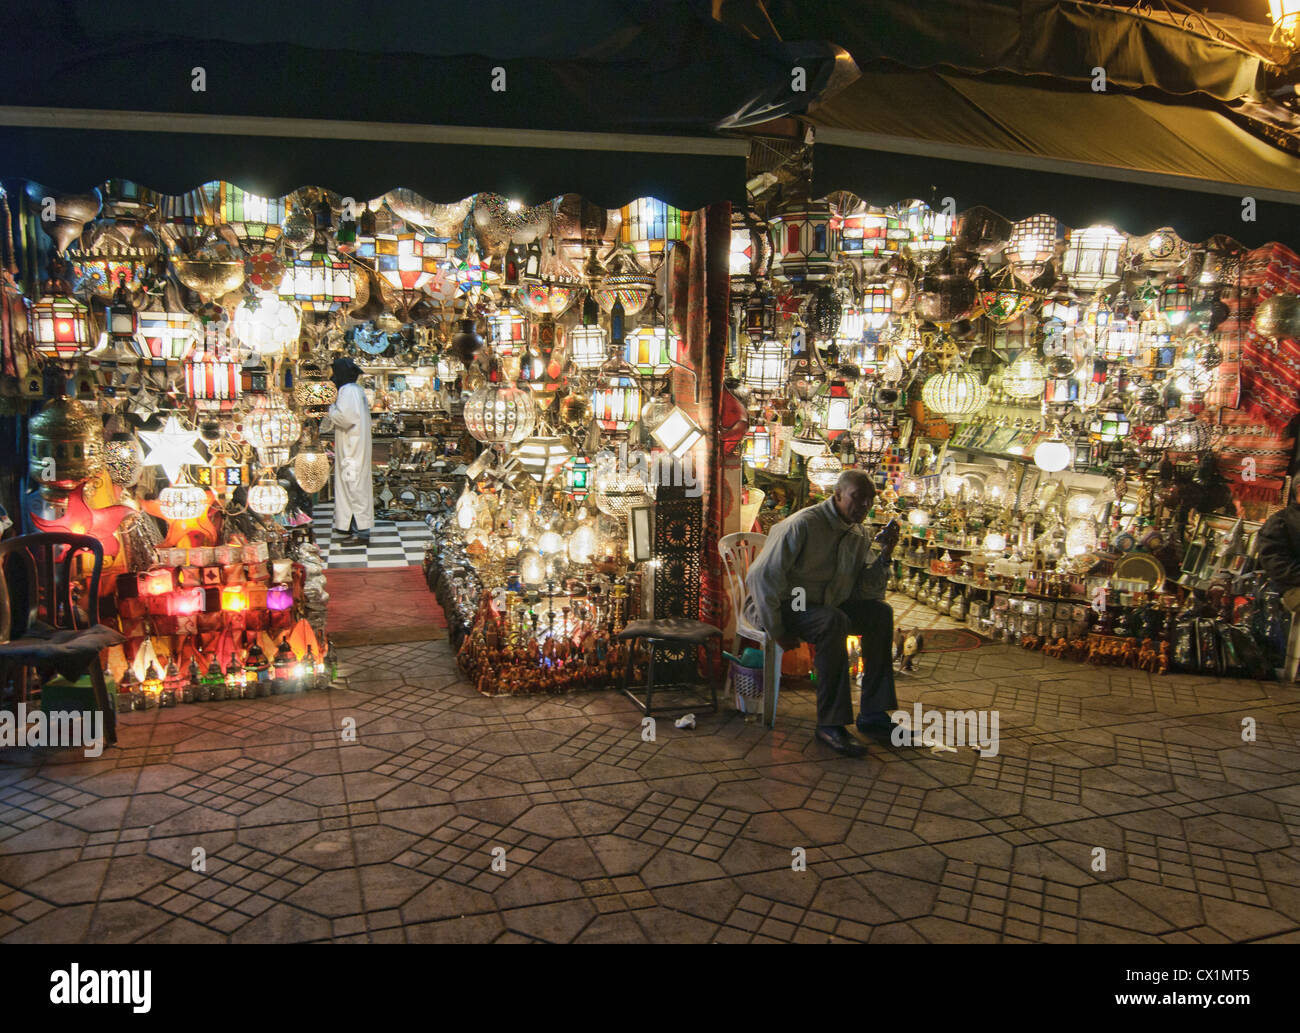 lamps for sale in the souk of the ancient medina in Marrakech, Morocco Stock Photo